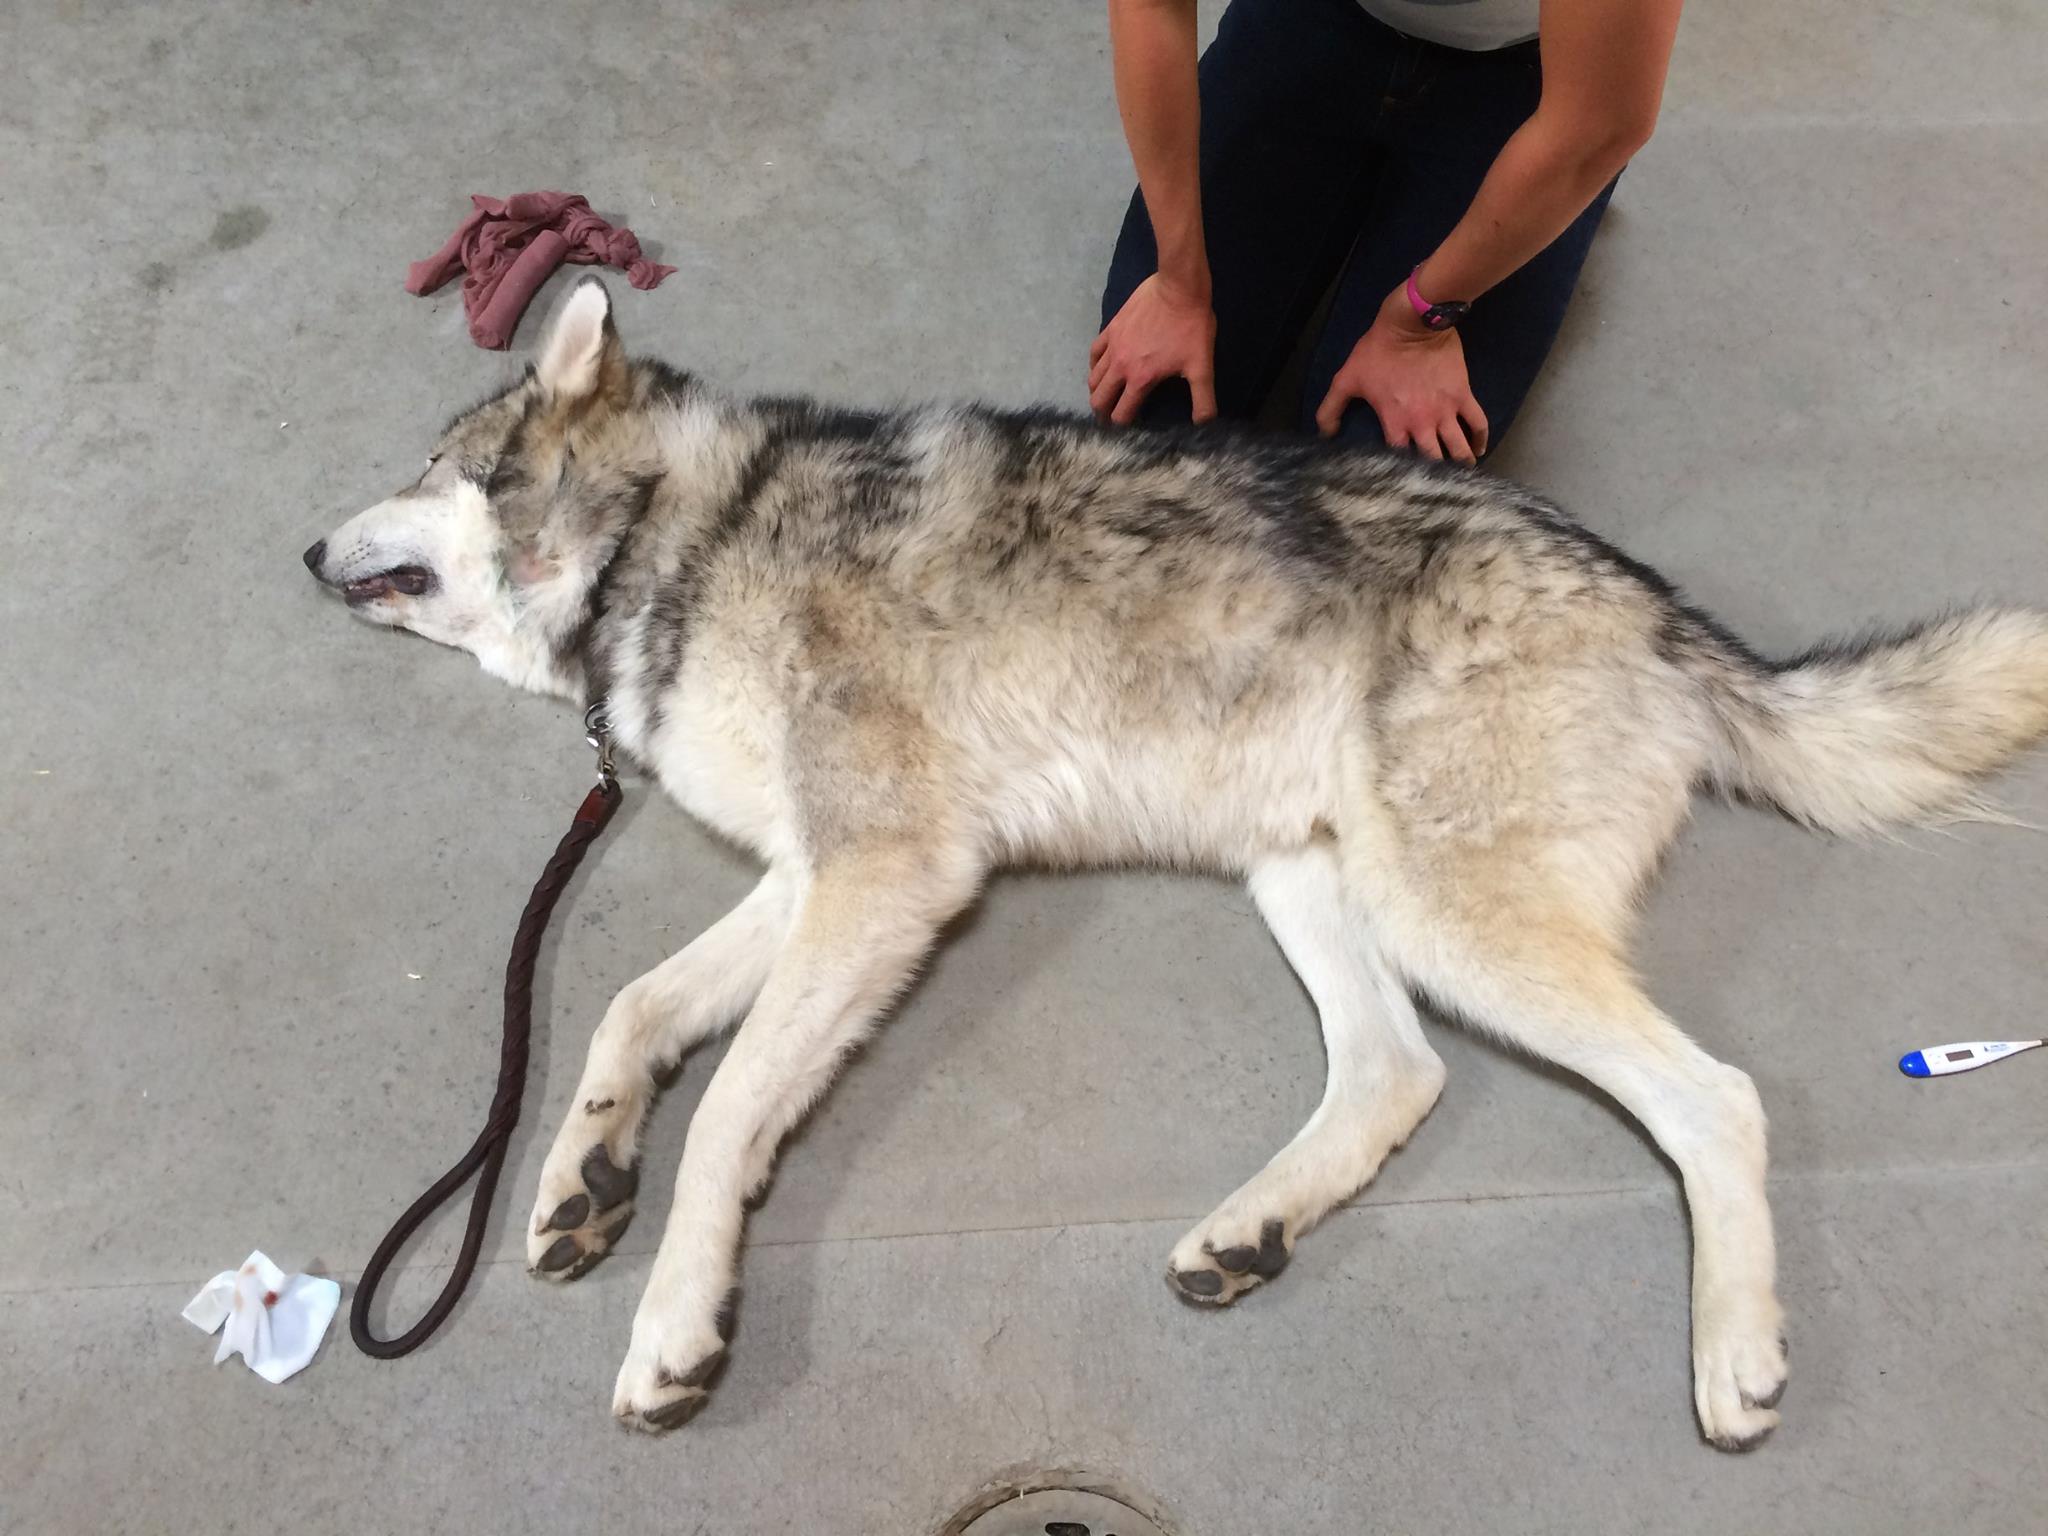 This 'Dog' Was Left To Starve After College Kid Bought Him On Craigslist